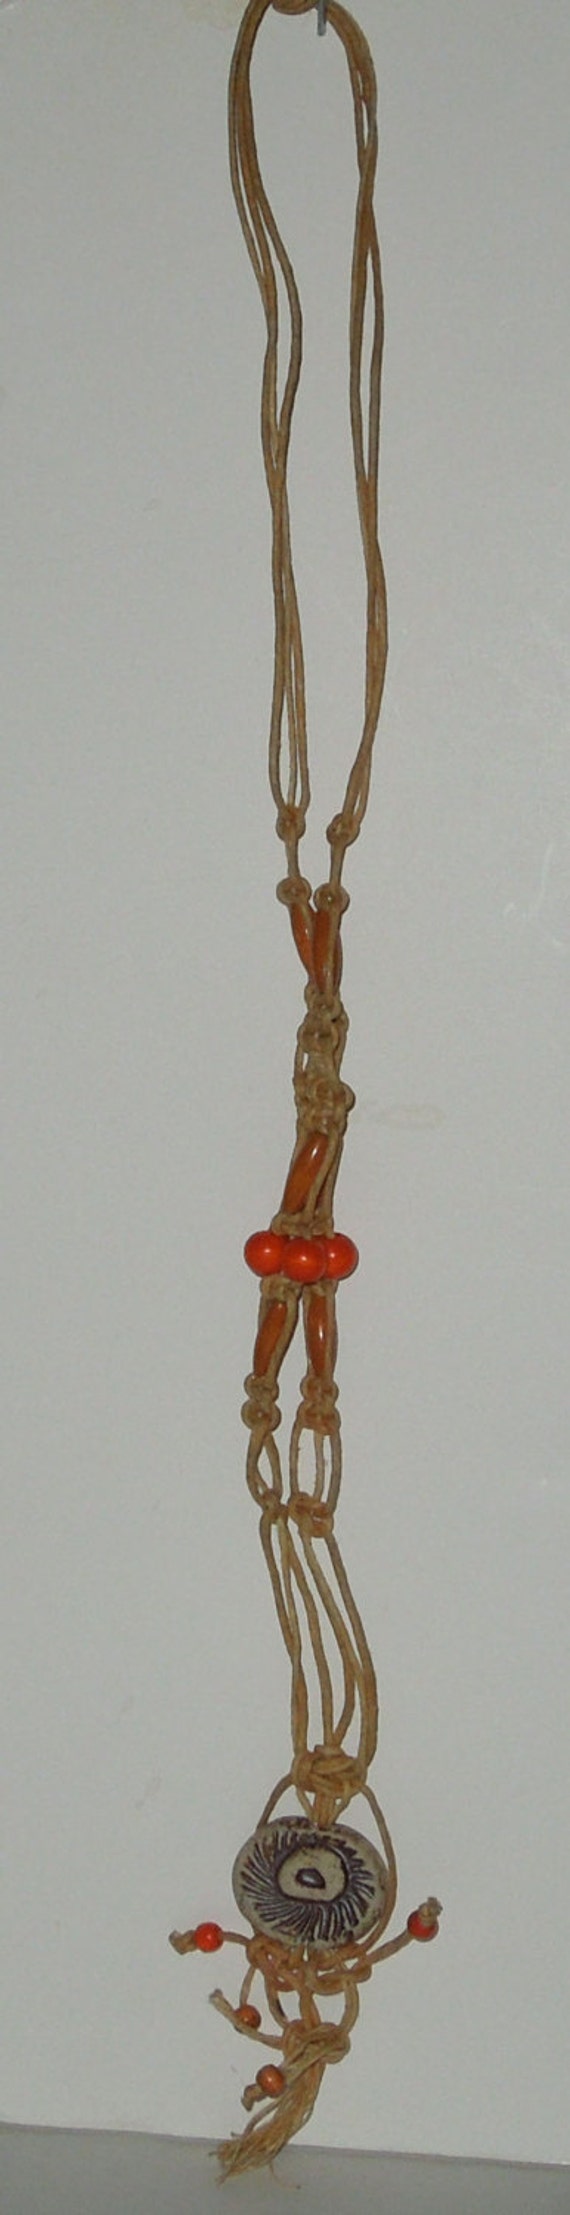 Vintage 1970s Macrame Necklace with Carved Stone a